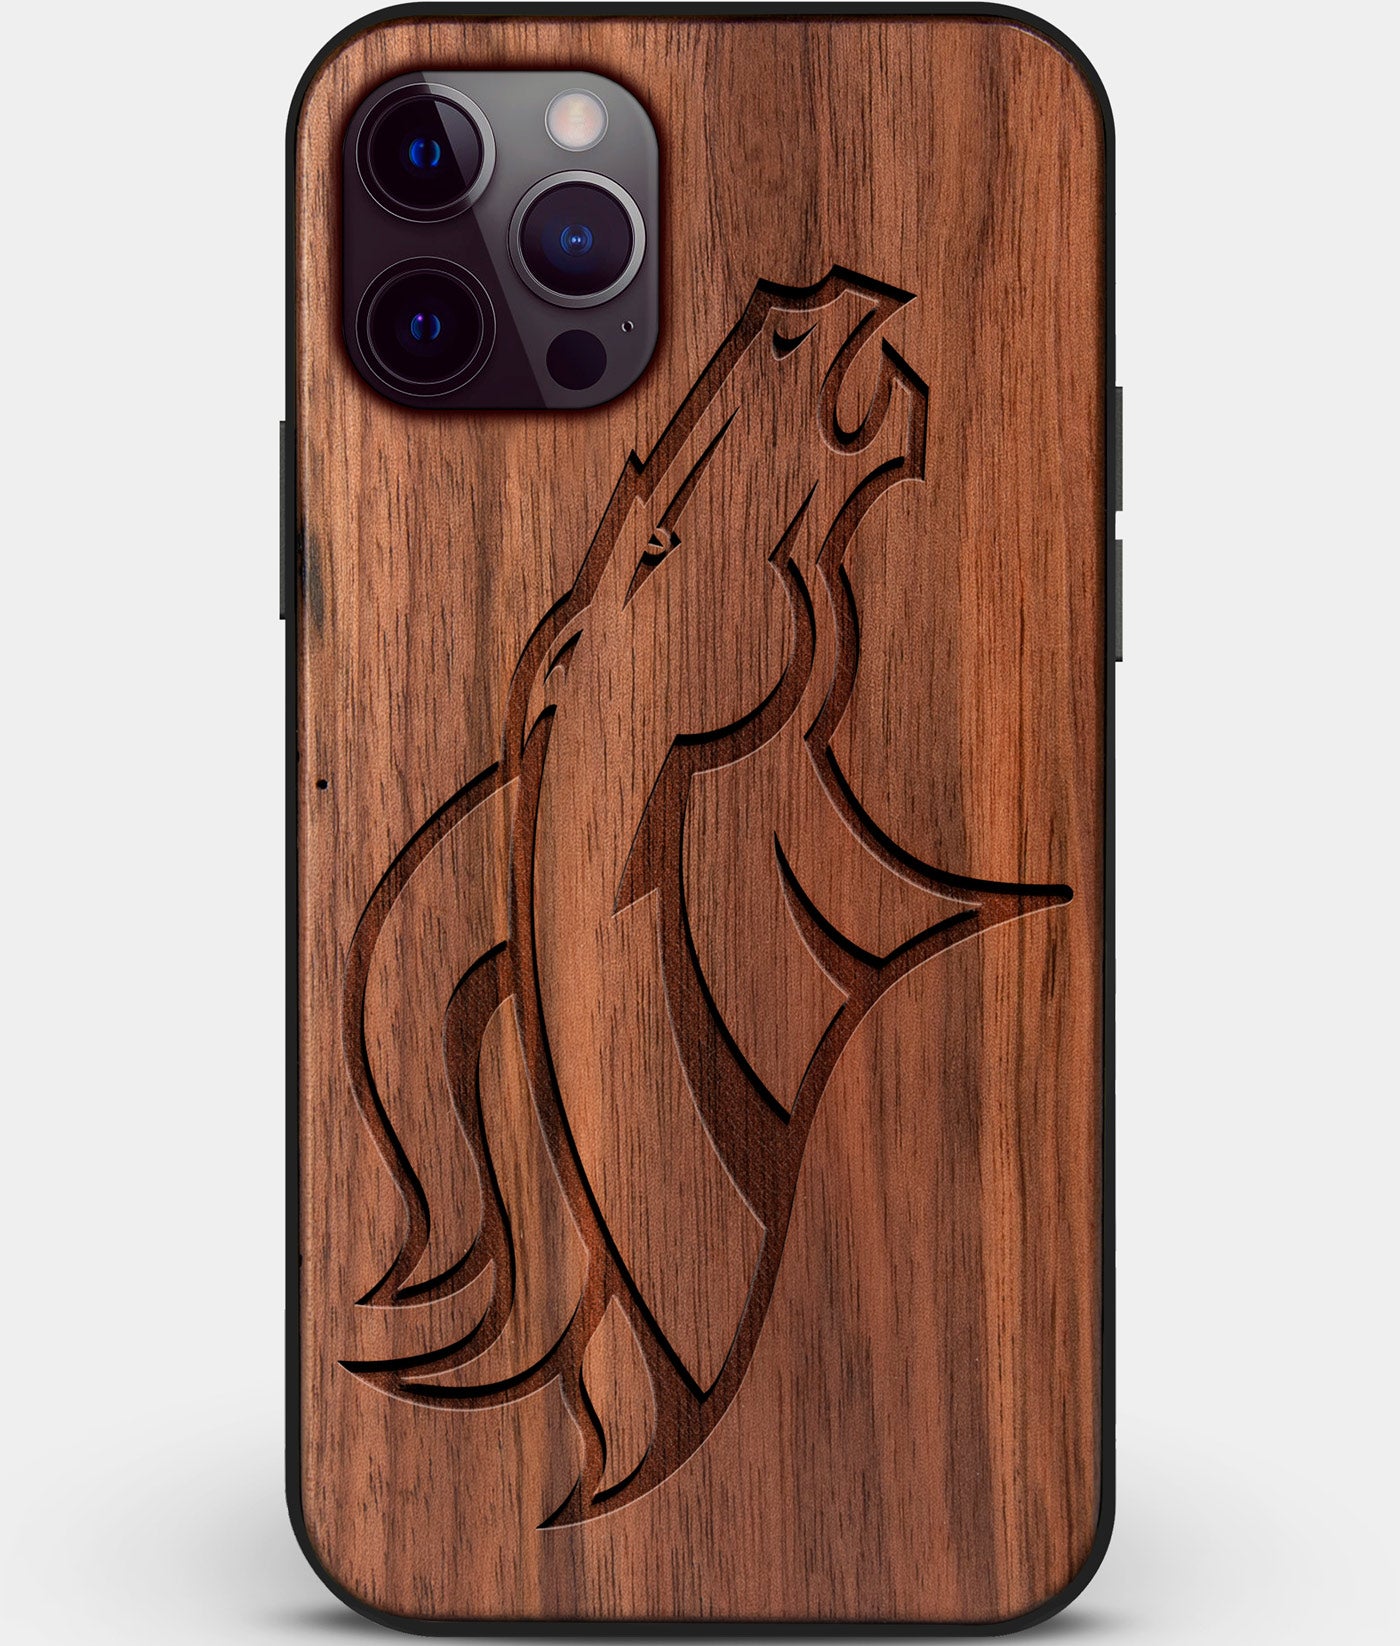 Custom Carved Wood Denver Broncos iPhone 12 Pro Case | Personalized Walnut Wood Denver Broncos Cover, Birthday Gift, Gifts For Him, Monogrammed Gift For Fan | by Engraved In Nature